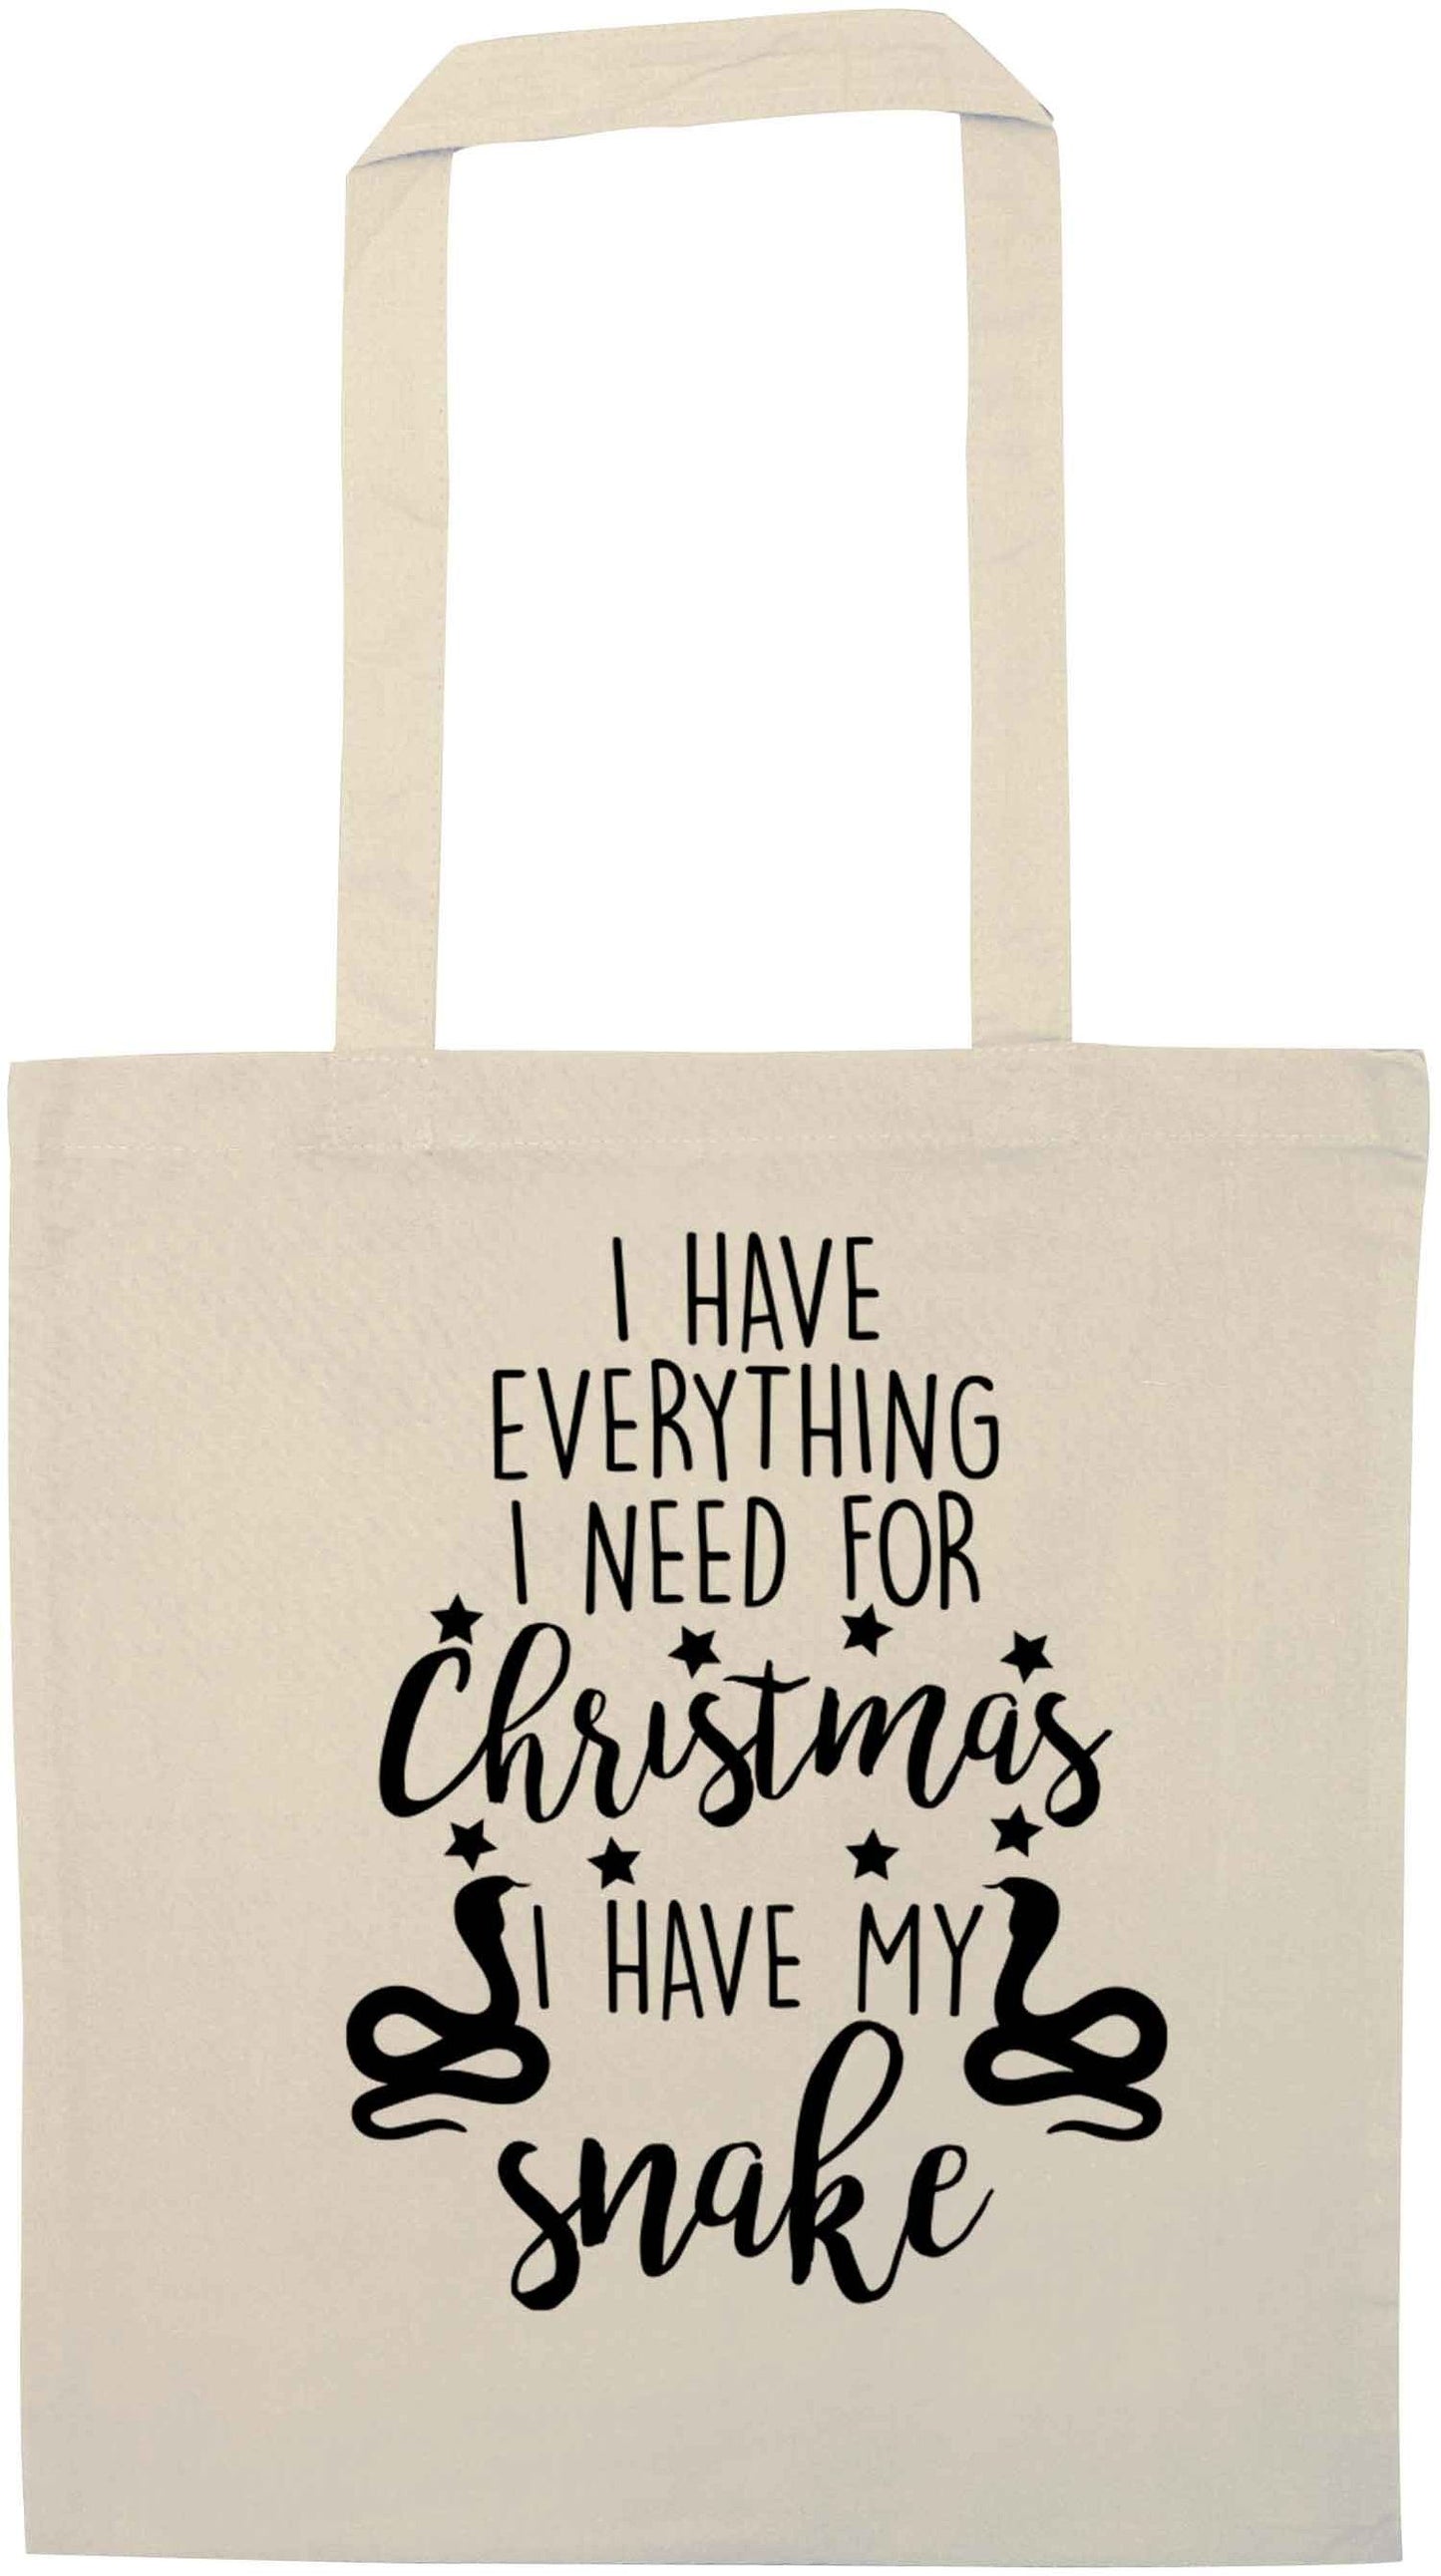 I have everything I need for Christmas I have my snake natural tote bag